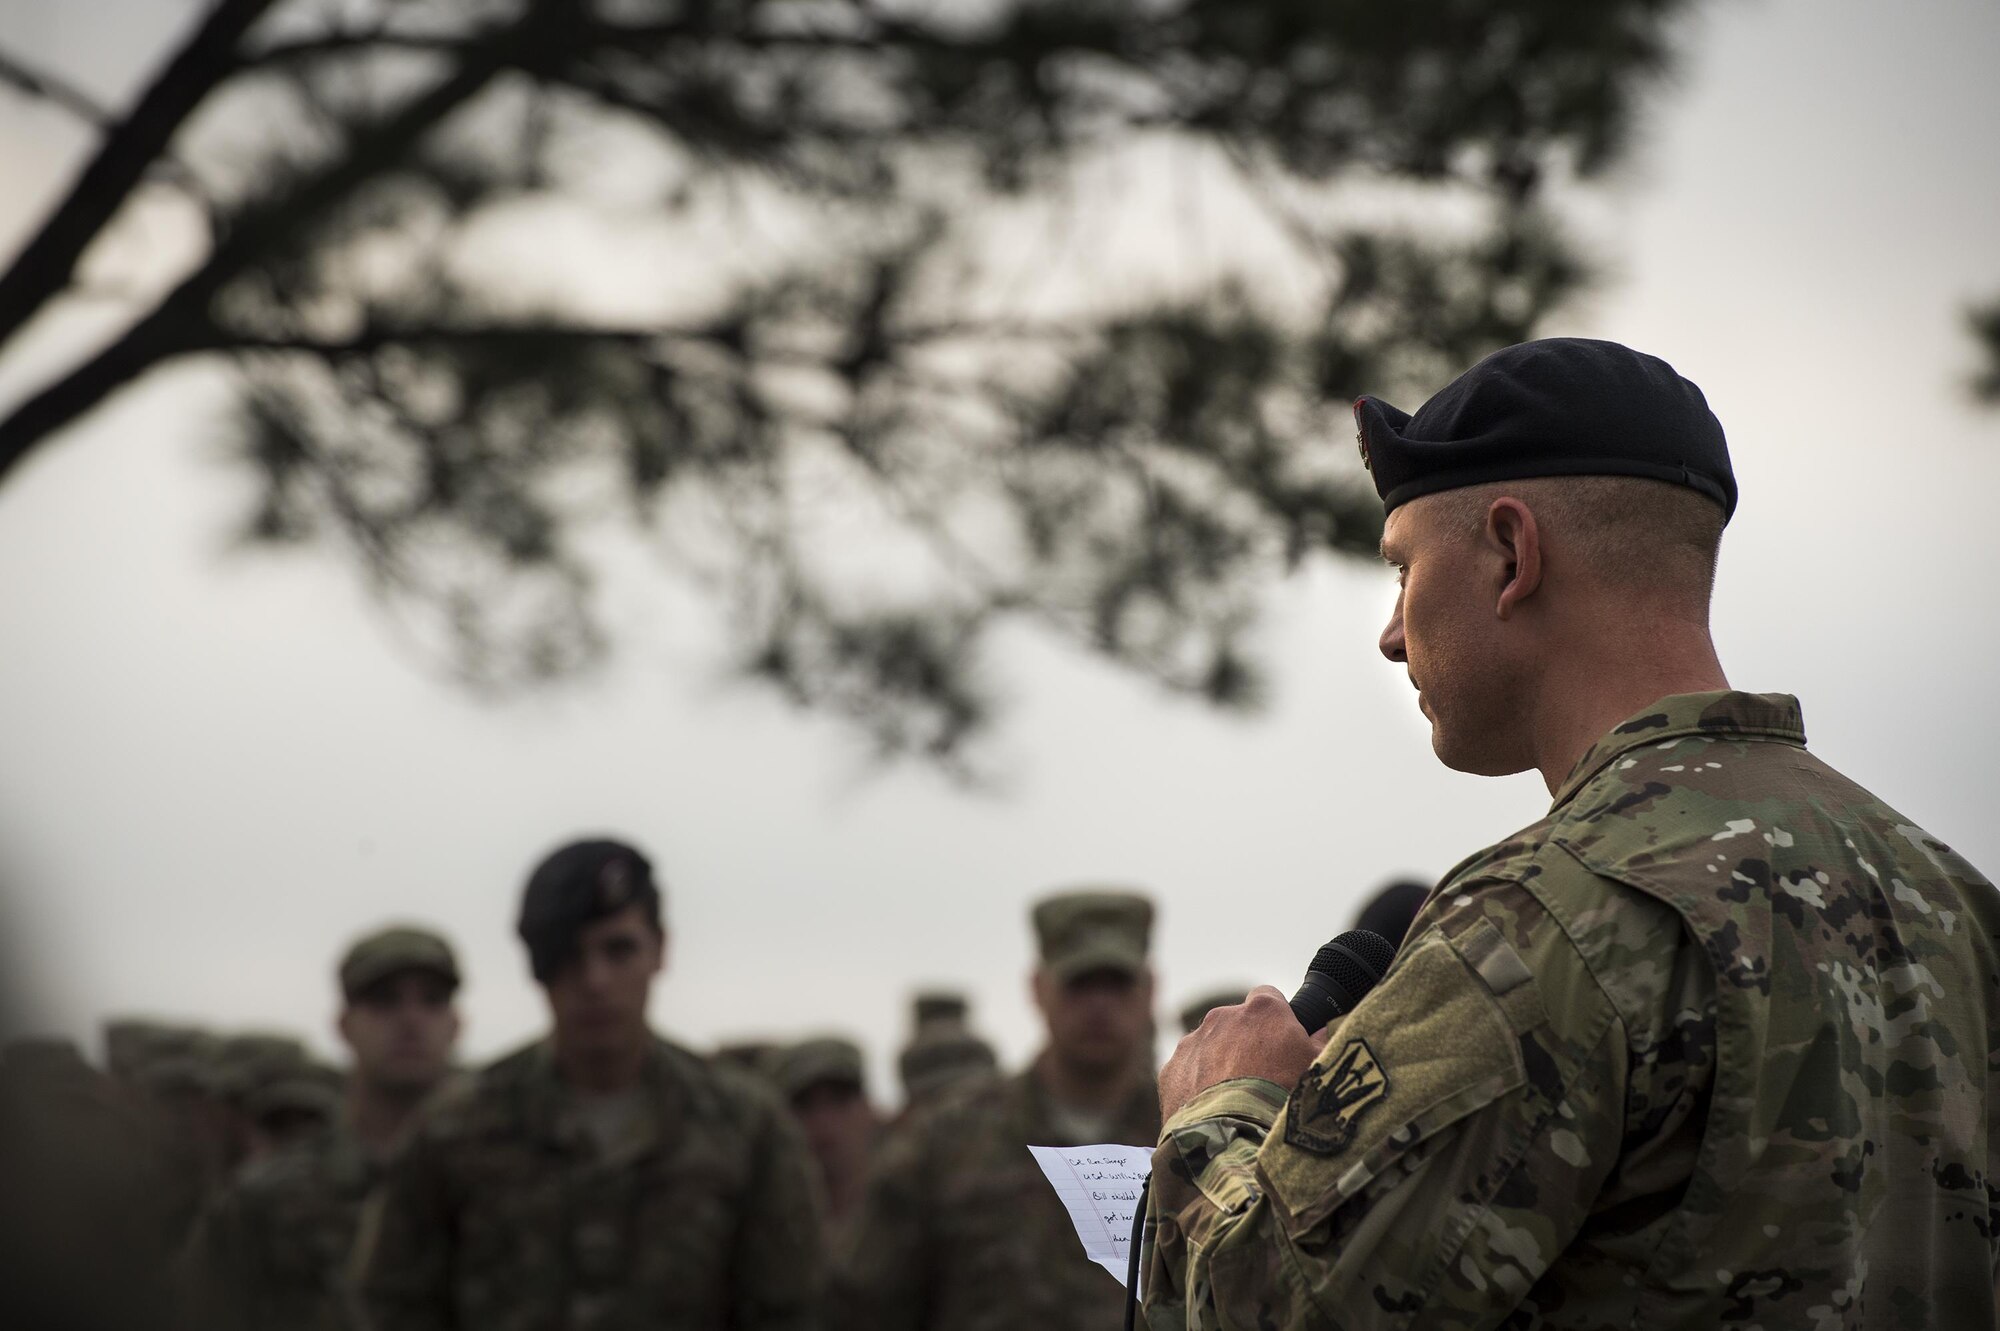 U.S. Air Force Col. Joseph Locke, 93d Air Ground Operations Wing commander, speaks about the heroism of the late Lt. Col William Schroeder, April 15, 2016, at Avon Park Air Force Range, Fla. The Airmen gathered to pay tribute to Lt. Col William Schroeder, who served alongside many members of the 93d AGOW. (U.S. Air Force Photo by Senior Airman Ryan Callaghan/Released)
